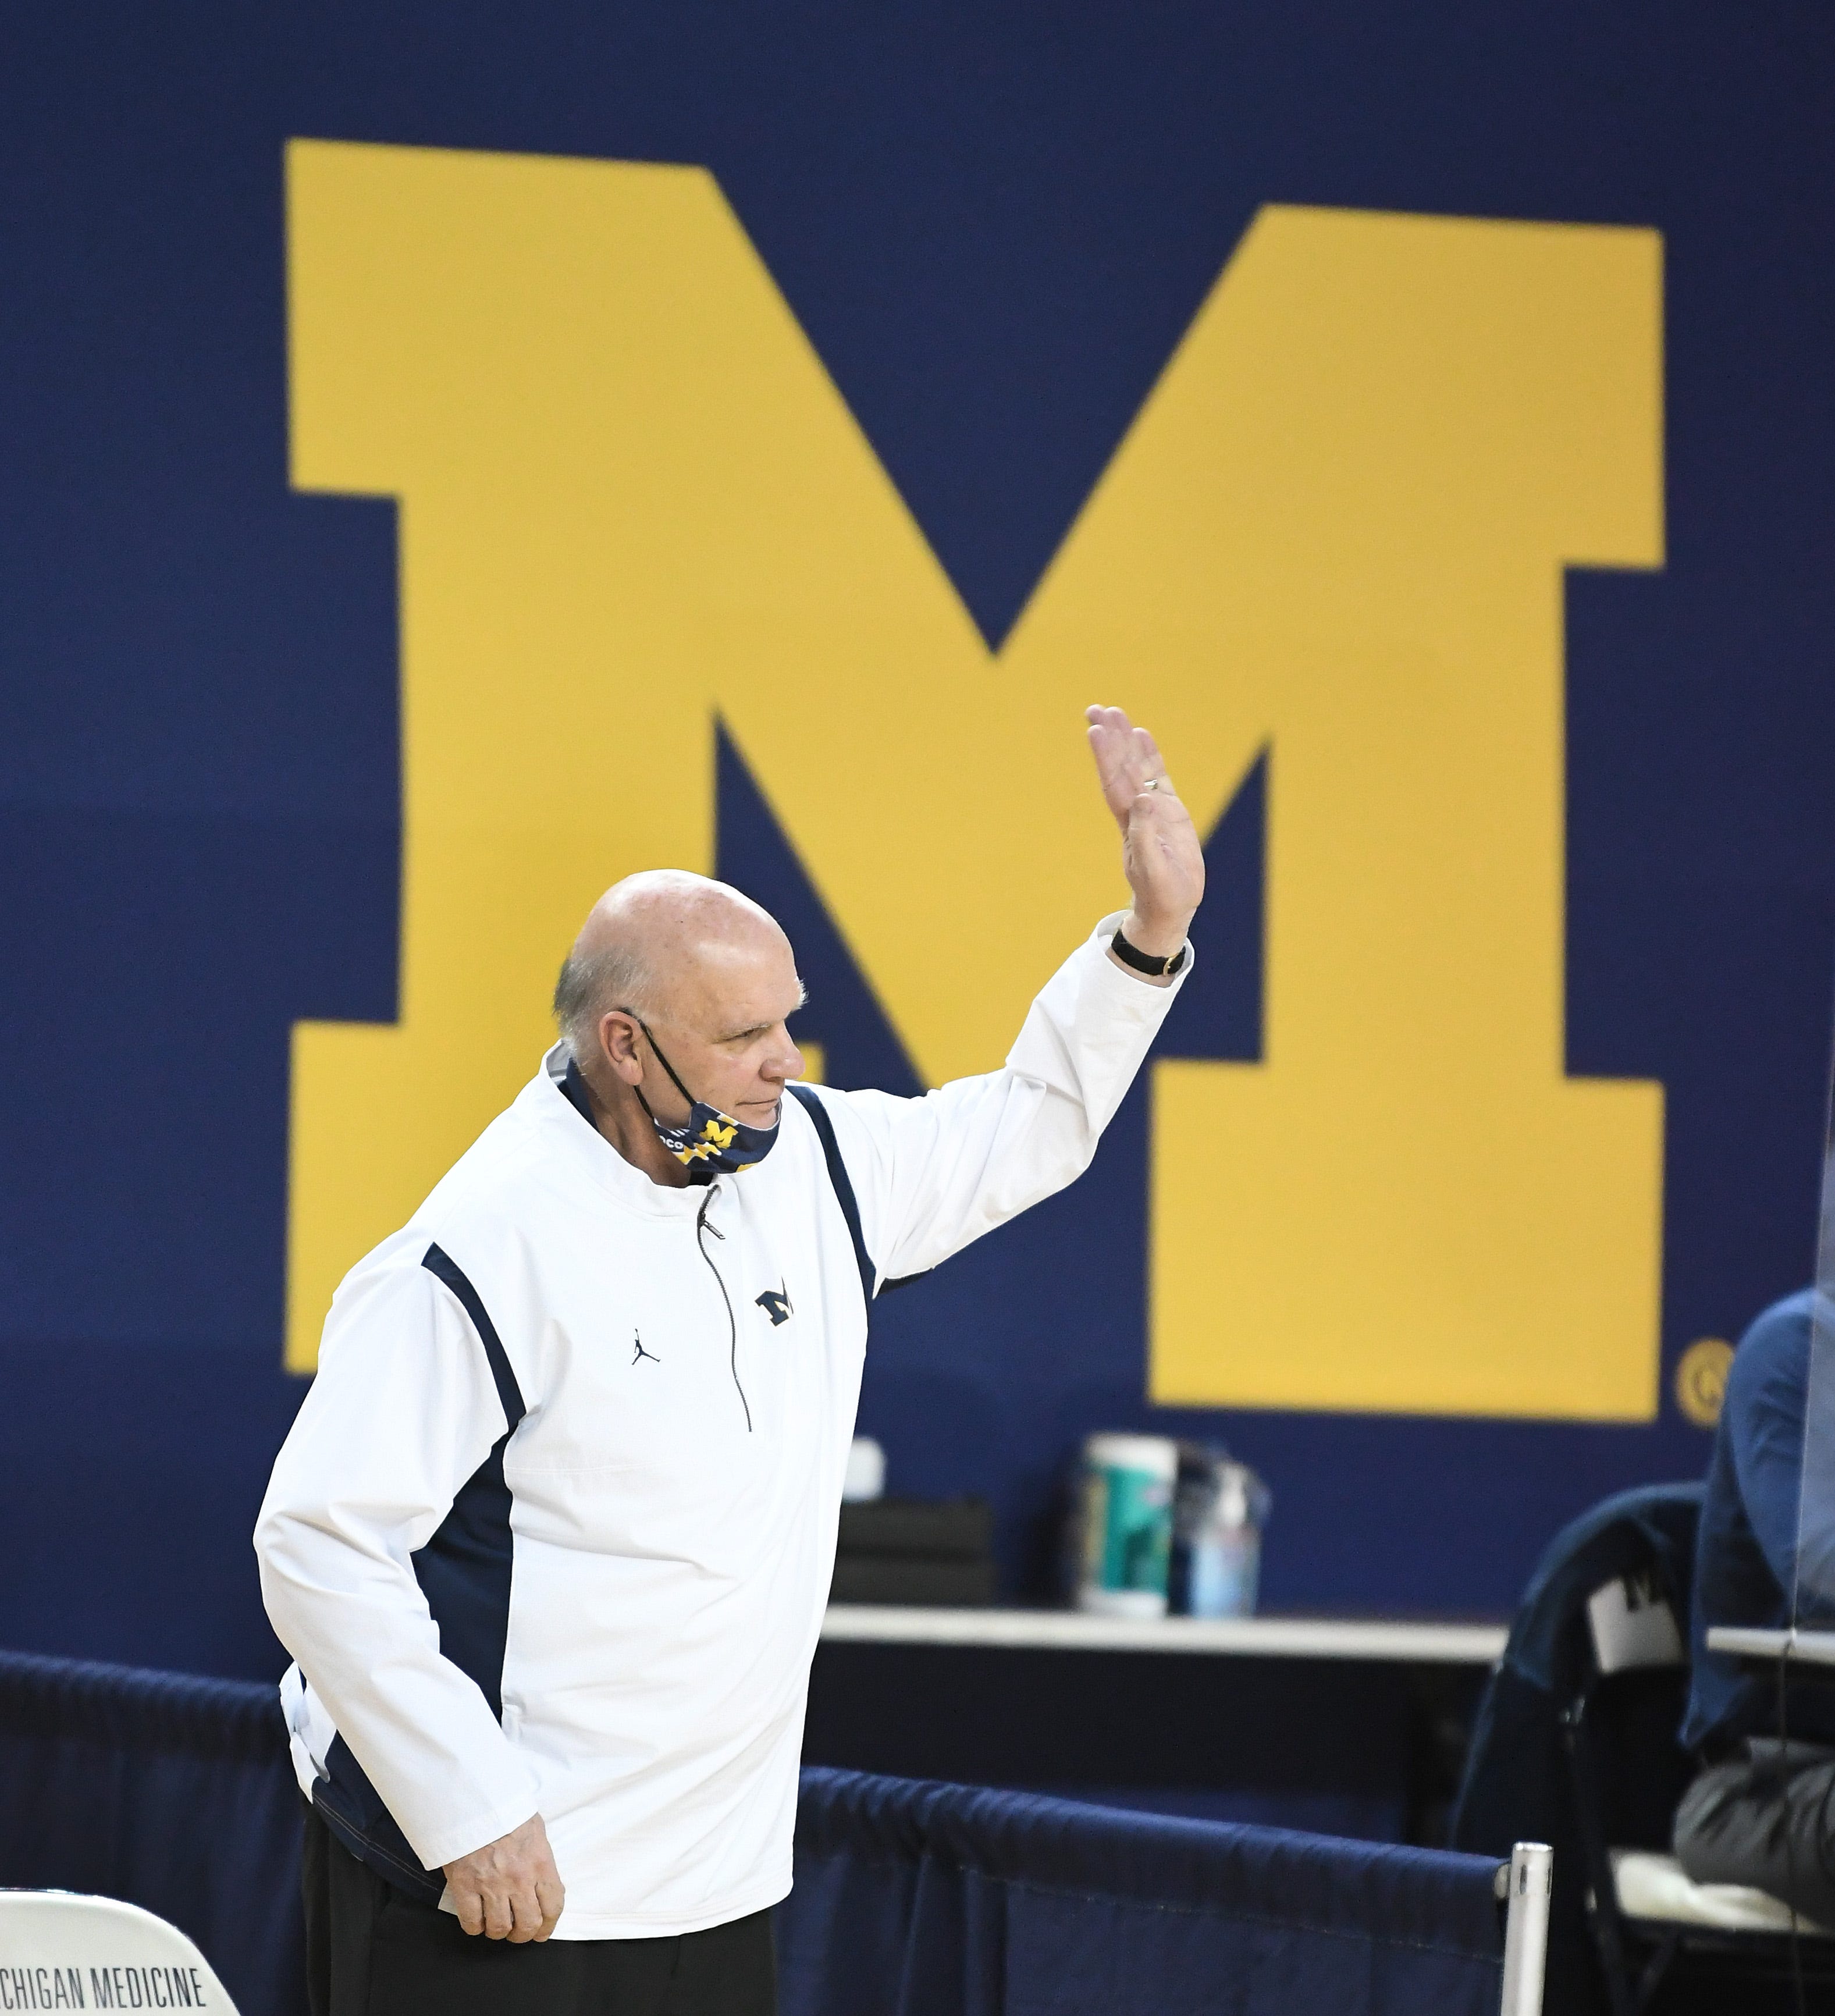 Michigan assistant coach Phil Martelli waves off a refs call late in the second half.  University of Michigan takes on University of Illinois at Crisler Center in Ann Arbor, Michigan on March 2, 2021.  (The Detroit News / Daniel Mears)